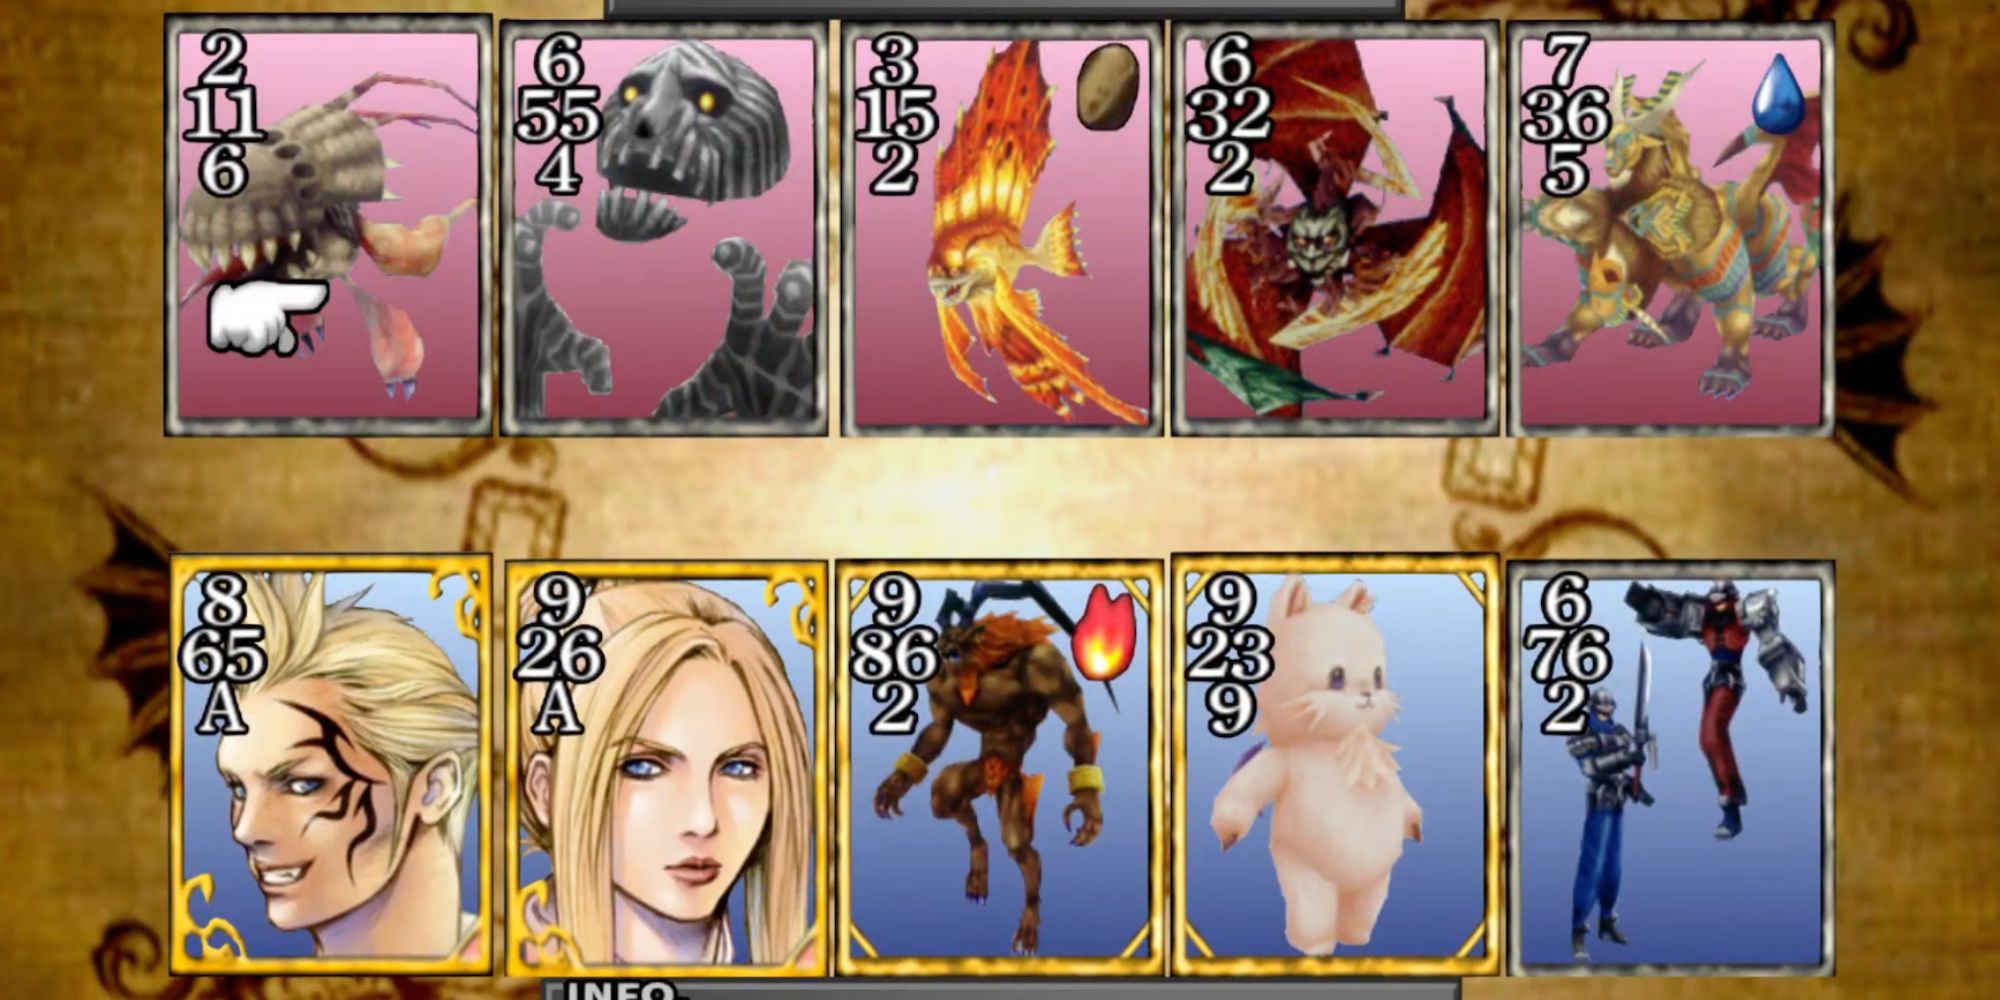 The victory screen for a Triple Triad game in Final Fantasy 8.